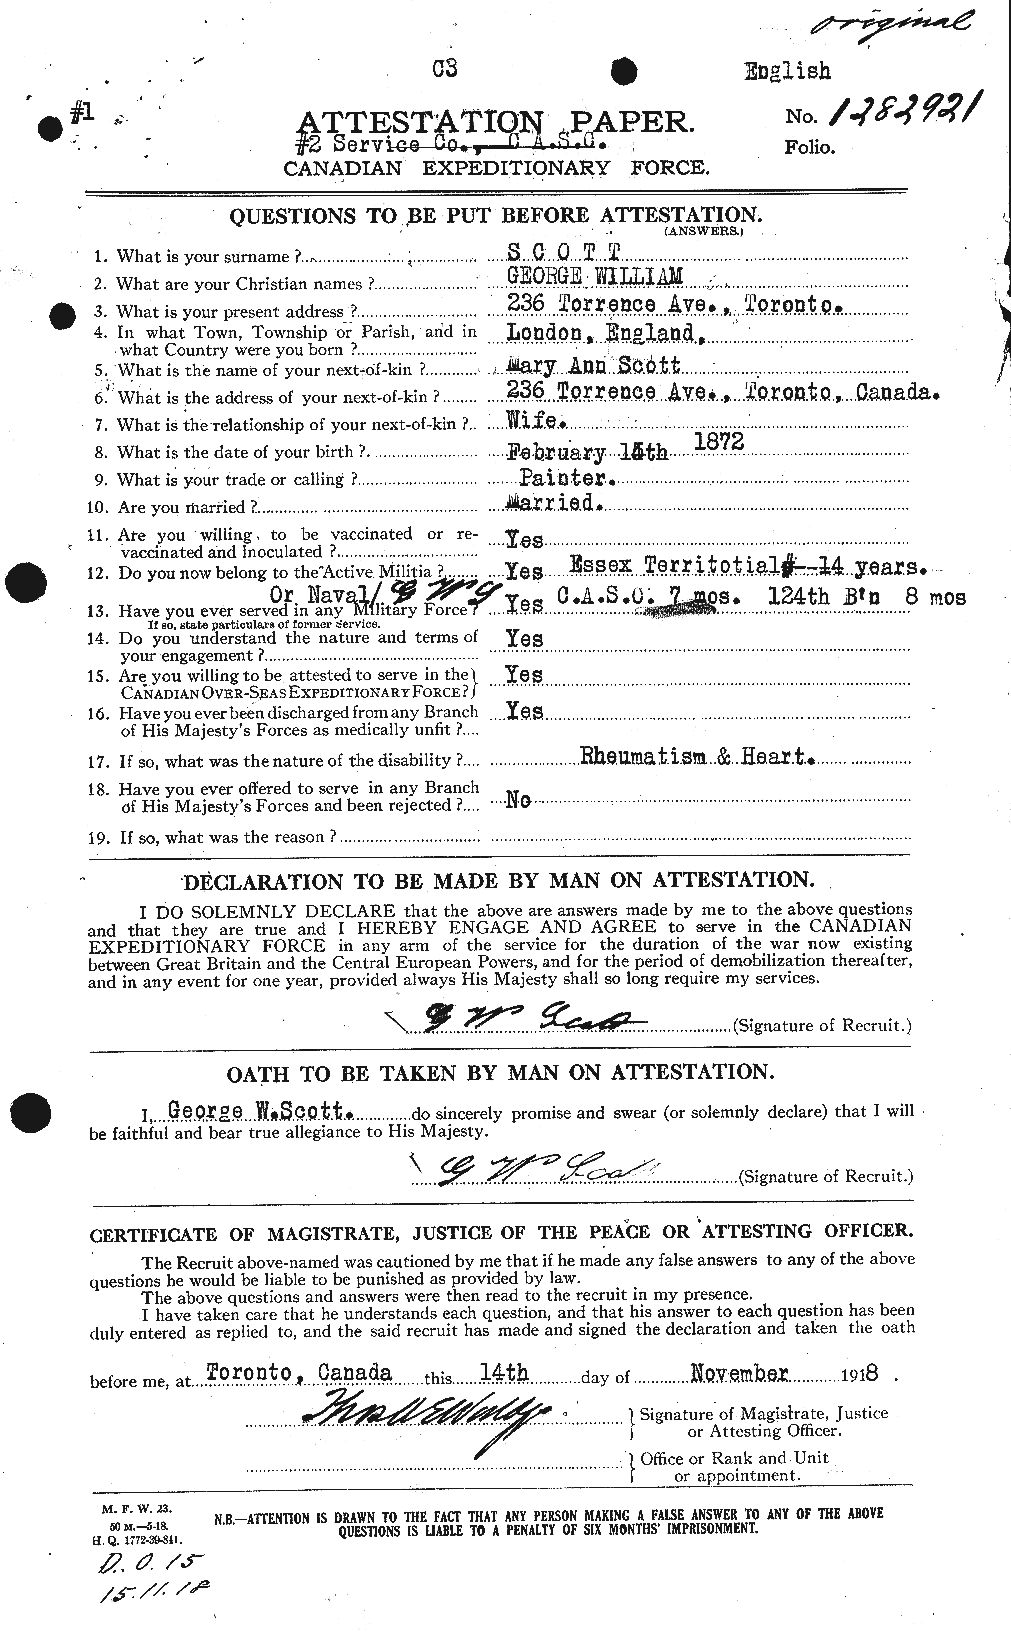 Personnel Records of the First World War - CEF 083131a